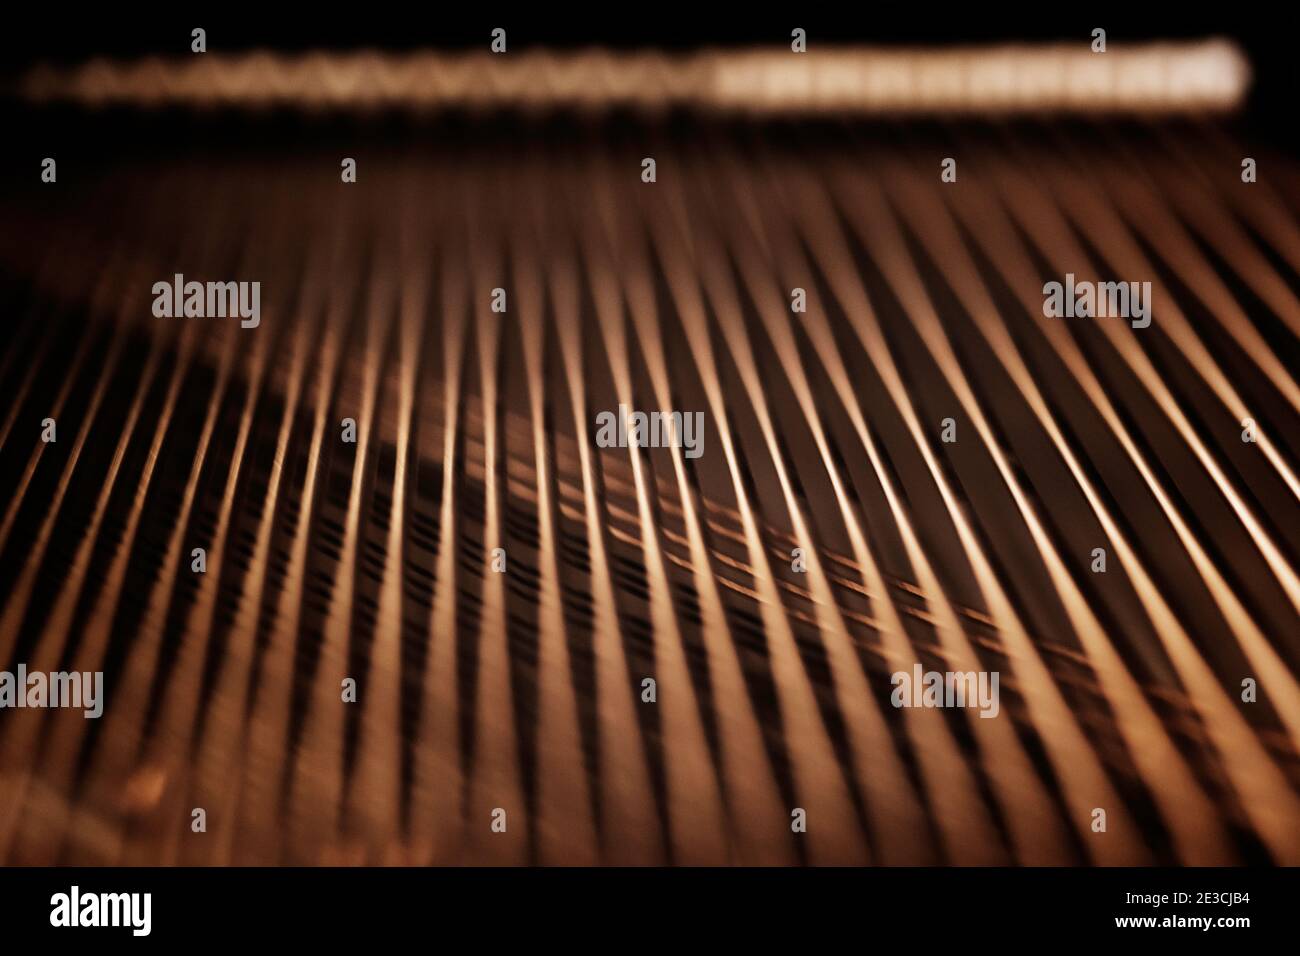 The strings on the soundboard of a Steinway M piano.  Shot with light from the interior bulbs in its room. Stock Photo